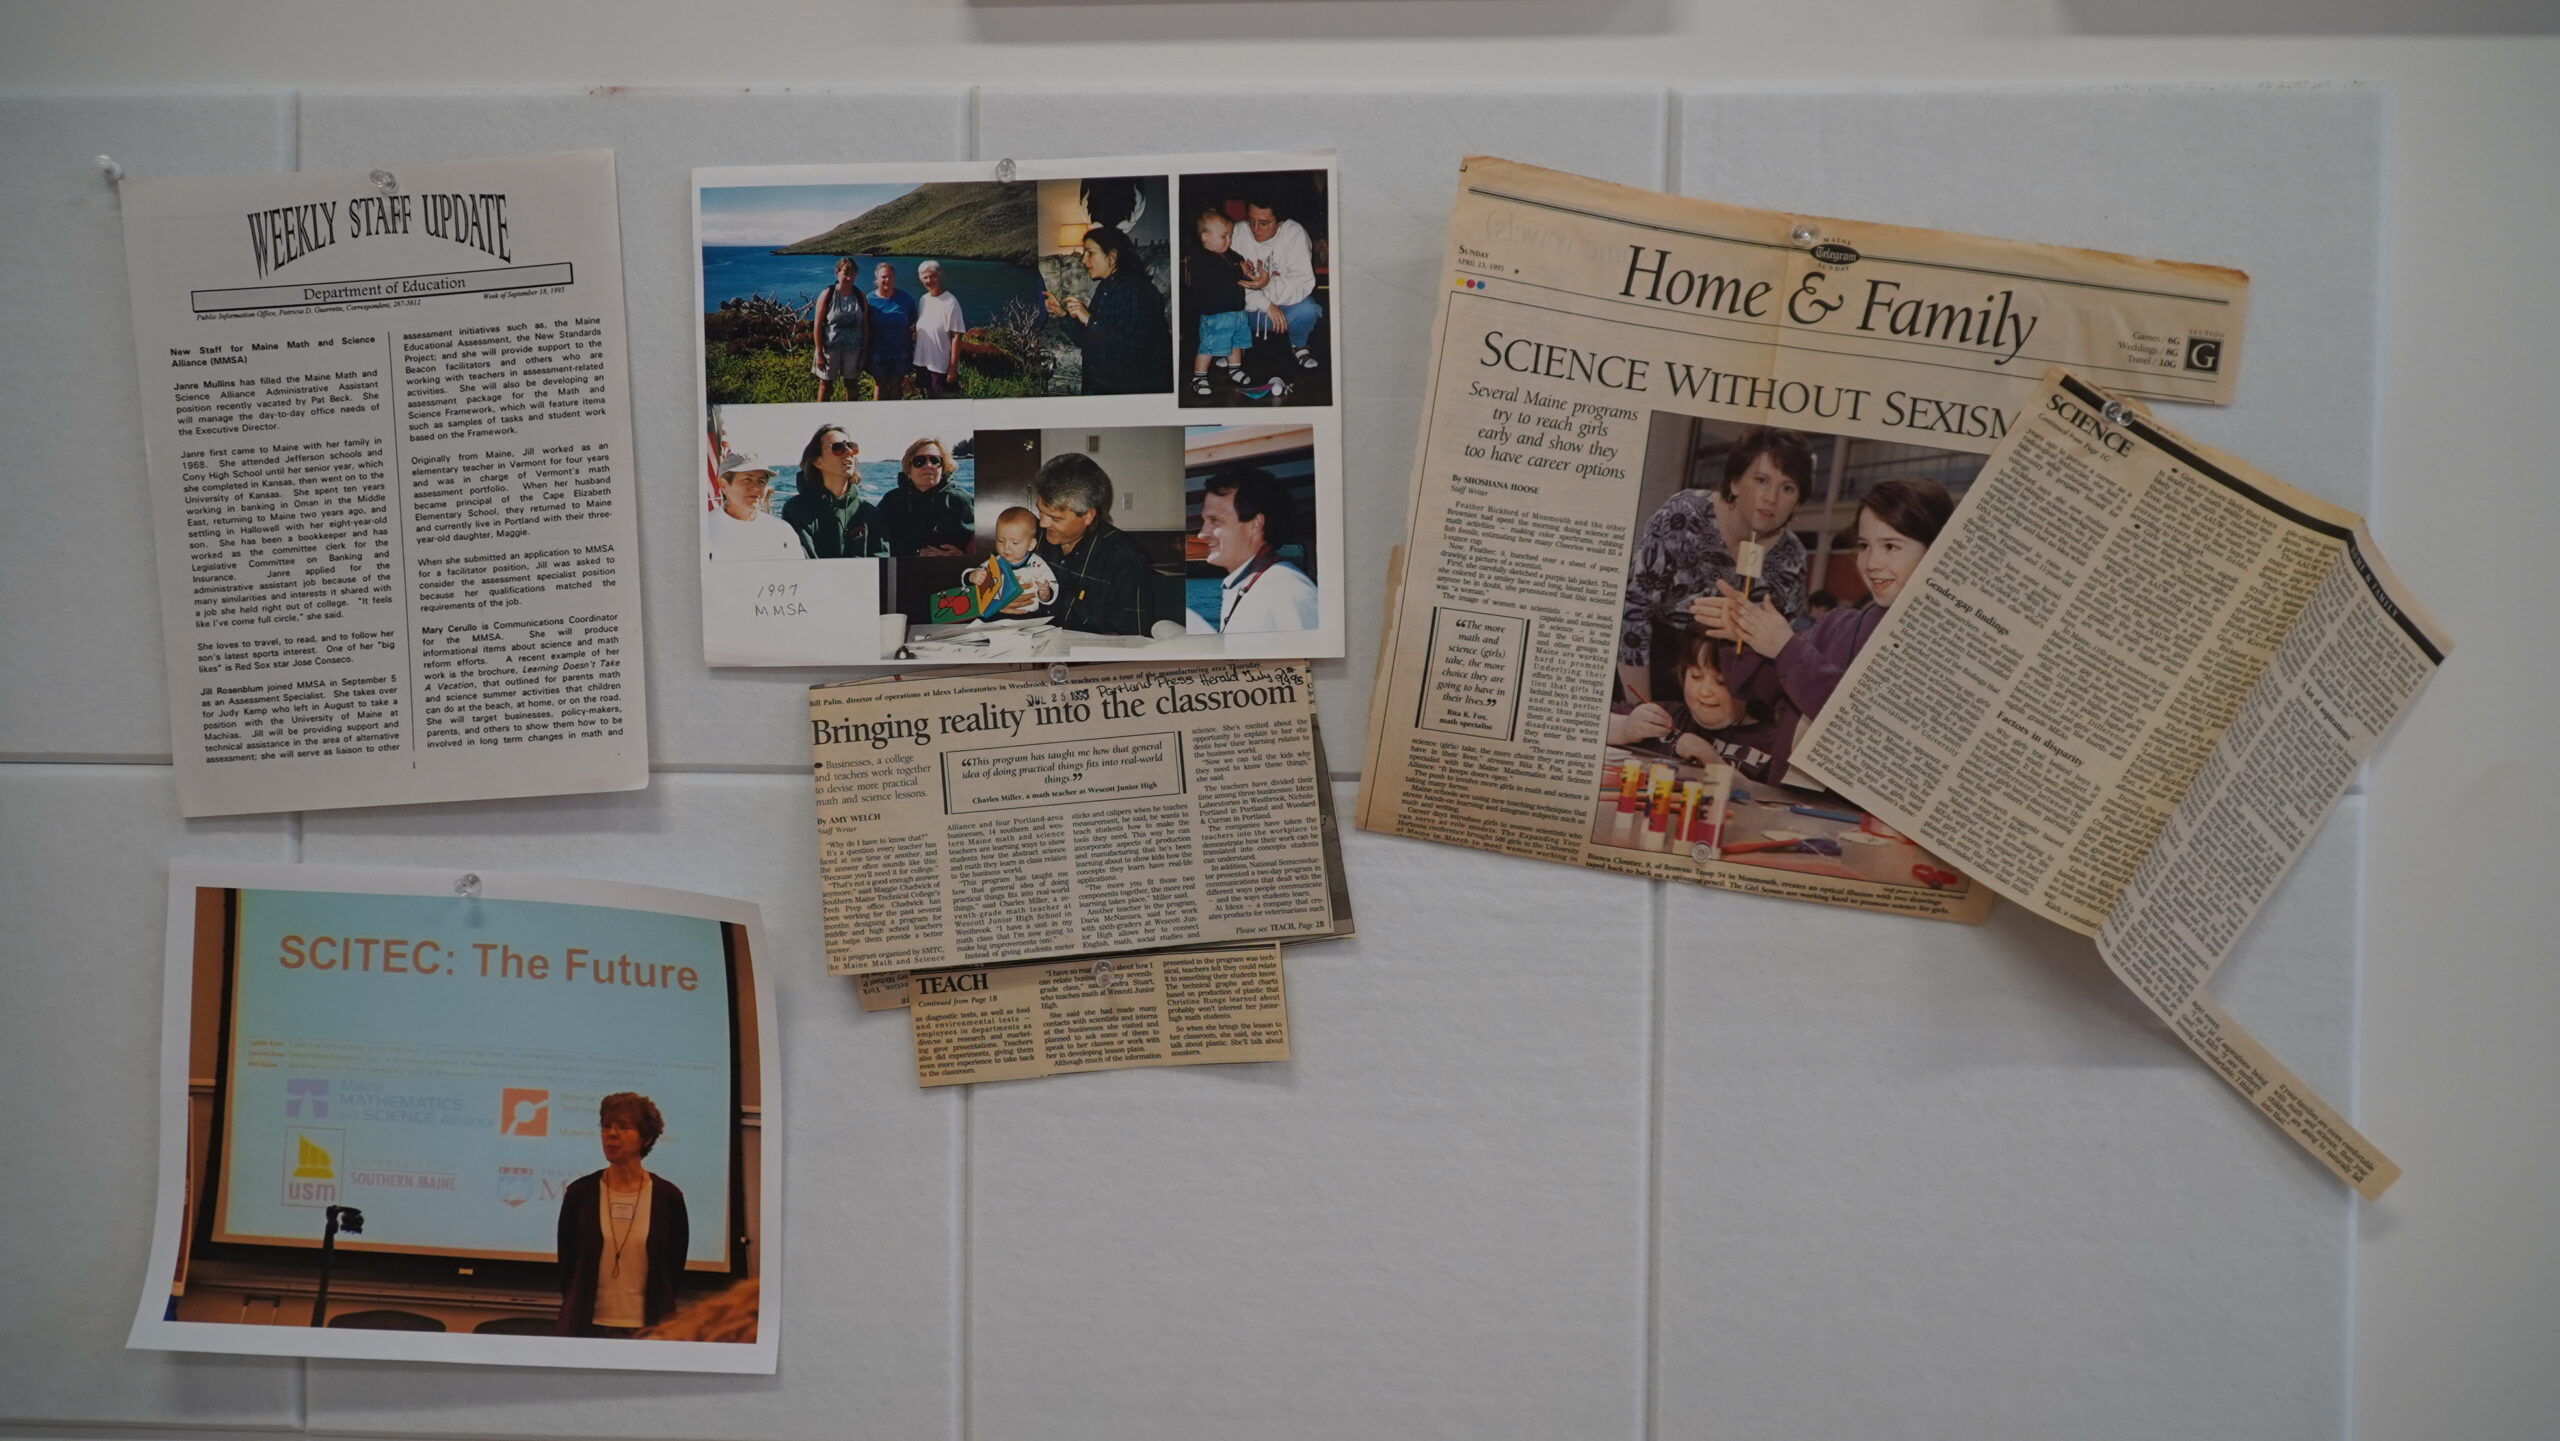 A photo of a powerpoint presenter, past staff photos, and more newspaper clippings hung on the wall for the 30th anniversary event.